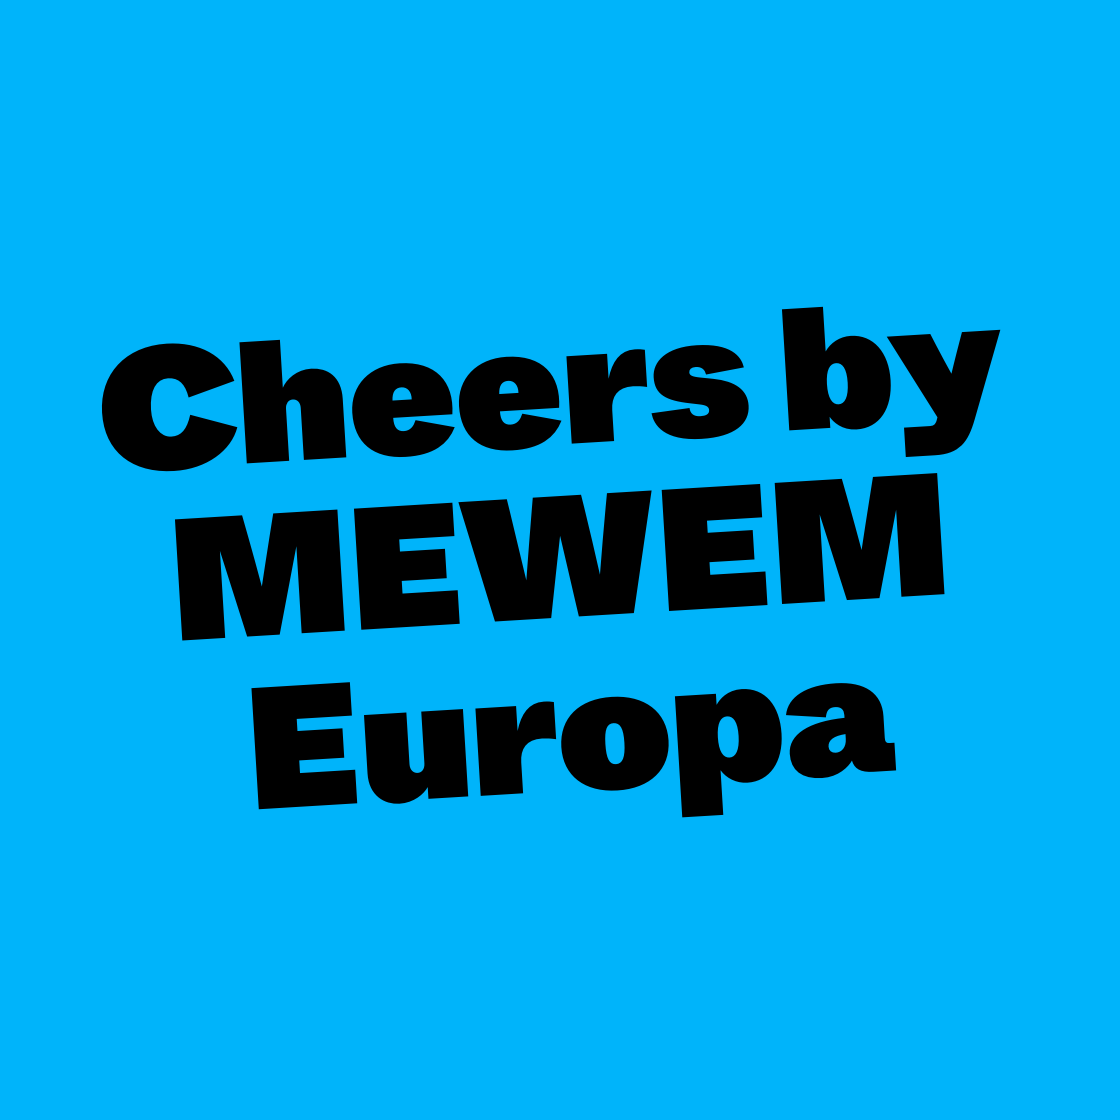 Cheers by MEWEM Europa